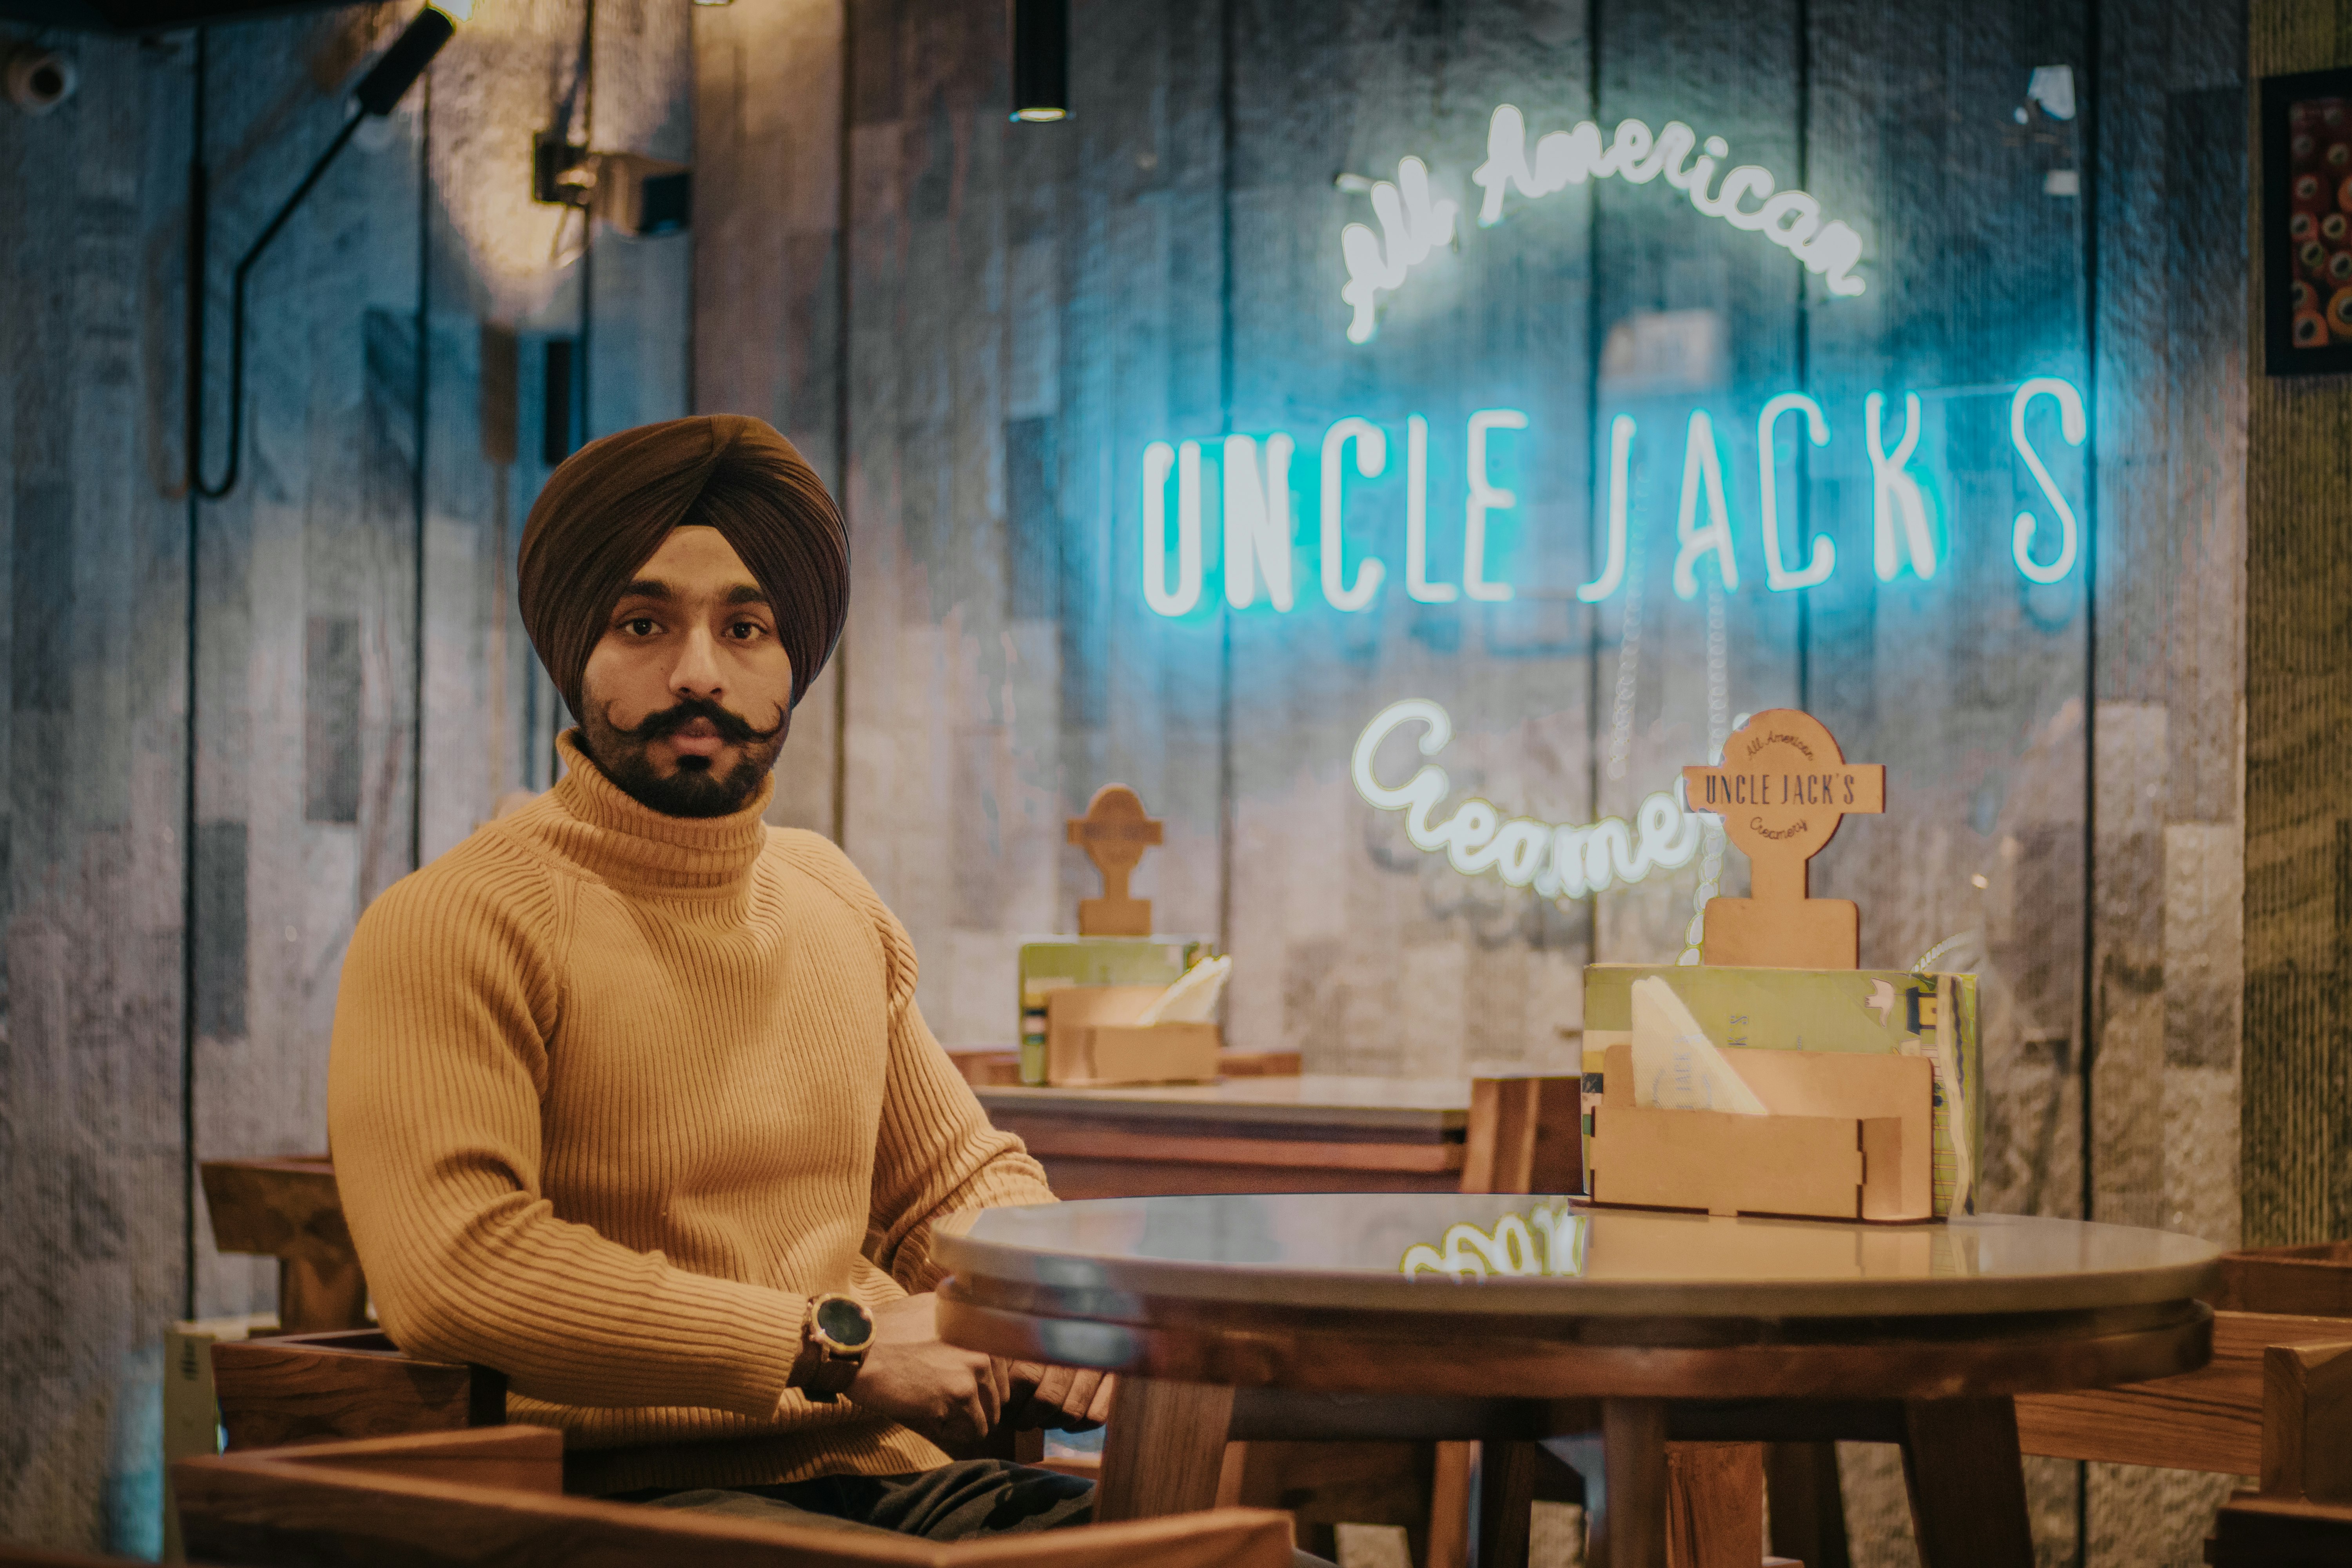 selective focus photography of man sitting beside Uncle Jack's sign